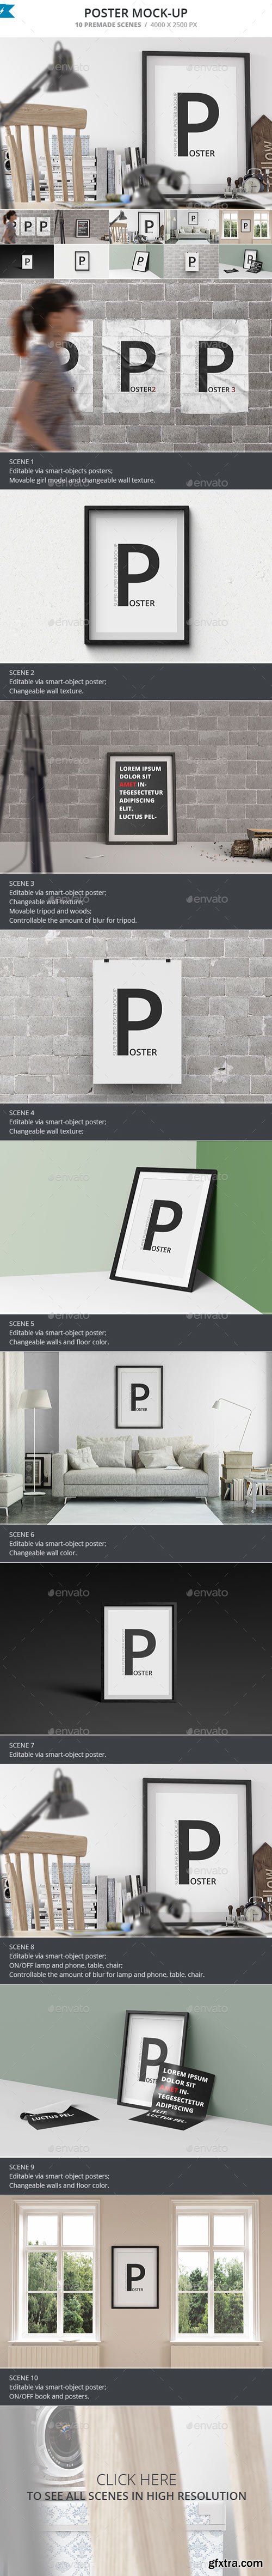 Graphicriver - 13043695 Poster Mock-up